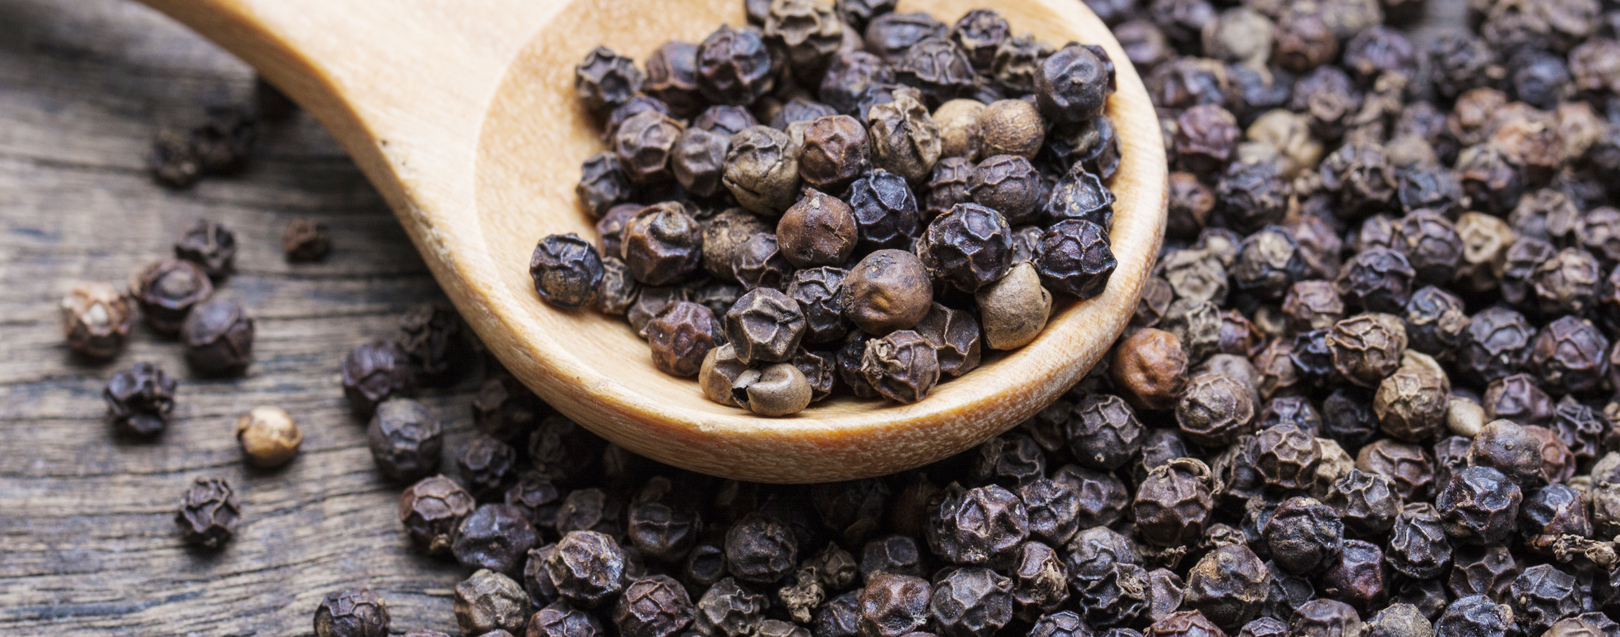 Govt imposes a minimum import price of Rs.500/kg on pepper